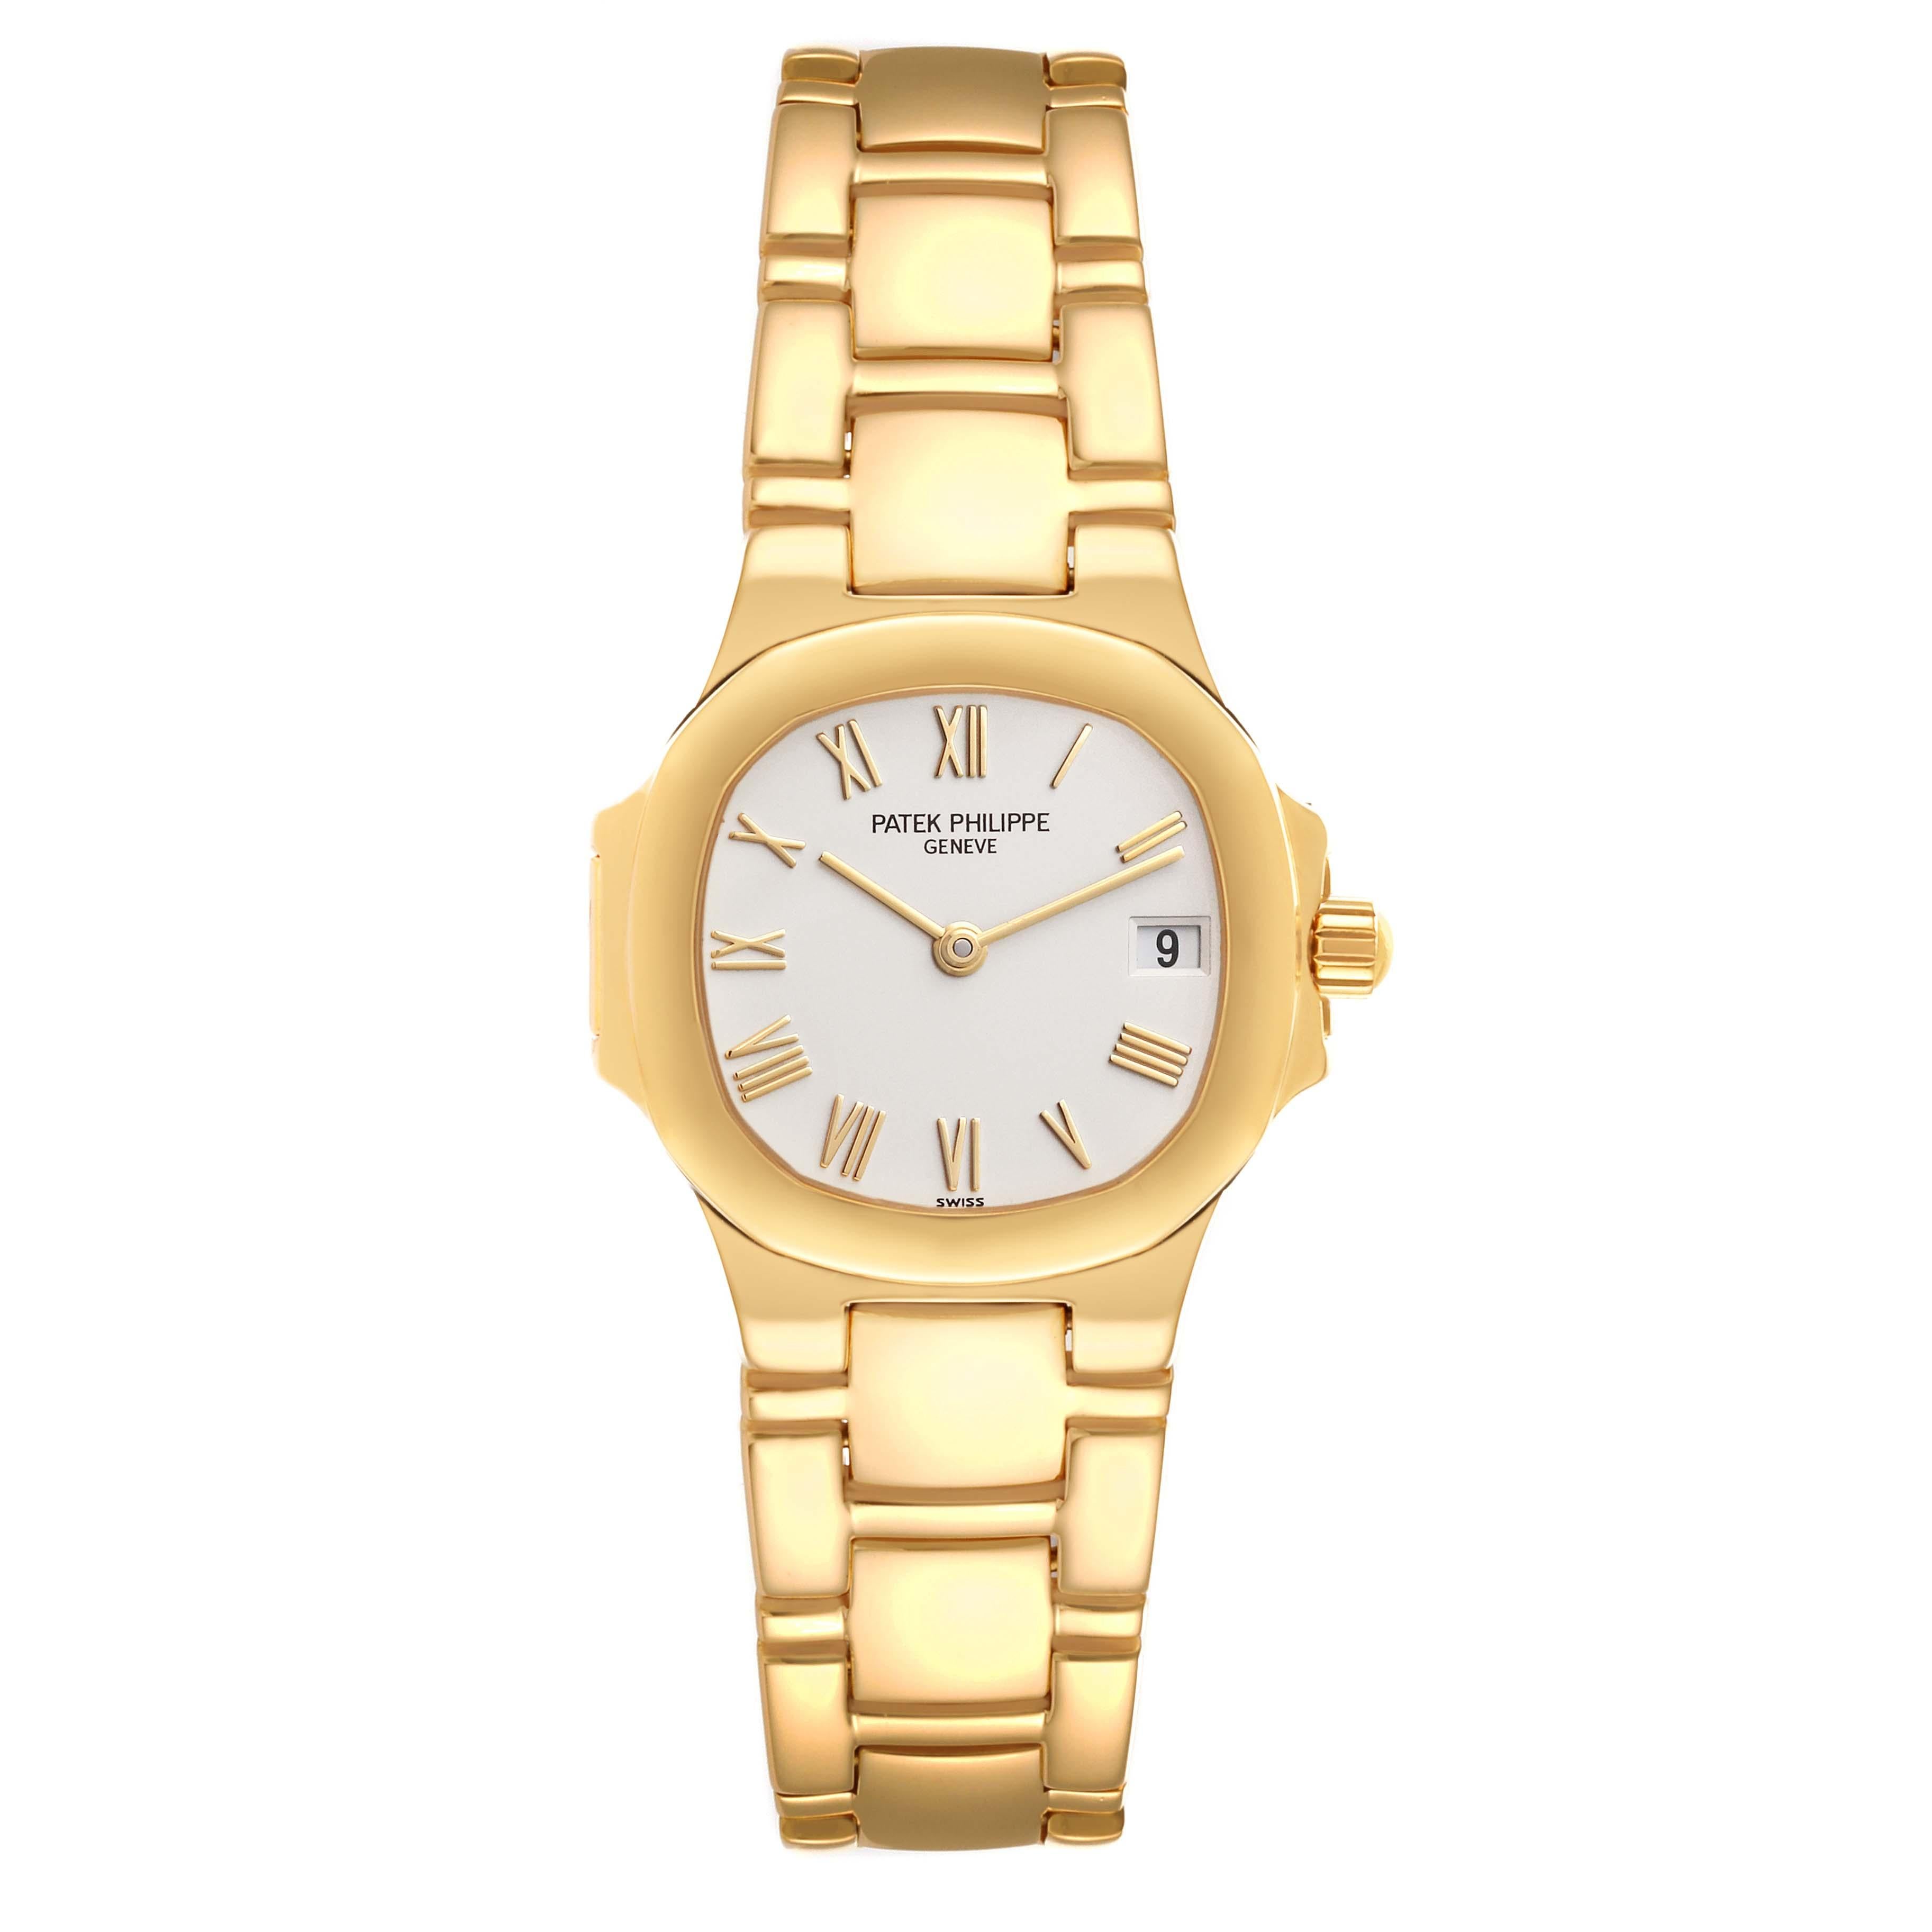 Patek Philippe Nautilus Yellow Gold White Dial Ladies Watch 4700. Quartz movement. 18k yellow gold cushion shape case 24.5 mm x 26 mm. 18K yellow gold smooth bezel. Scratch resistant sapphire crystal. White ivory dial with raised yellow gold Roman